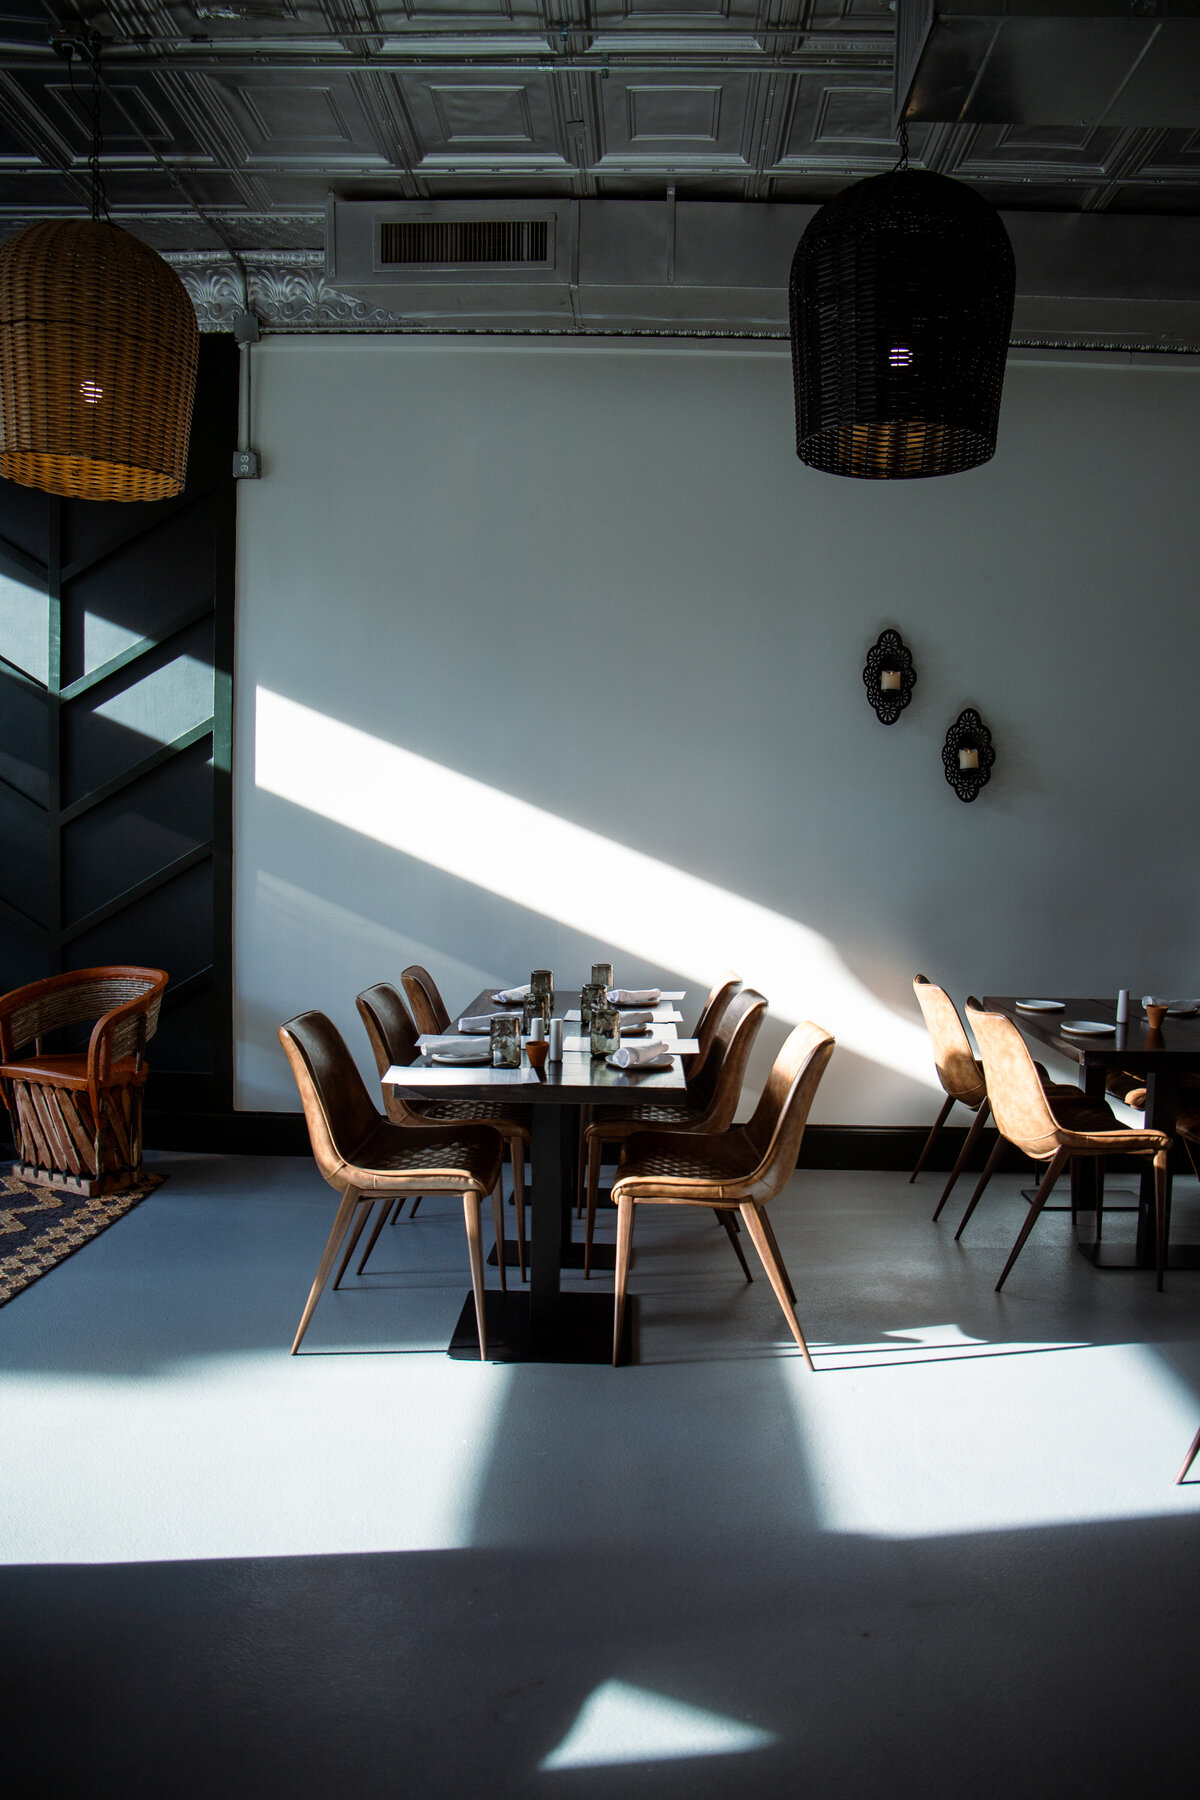 A table and chairs on the interior of a restaurant with a sun beam cutting through the image.